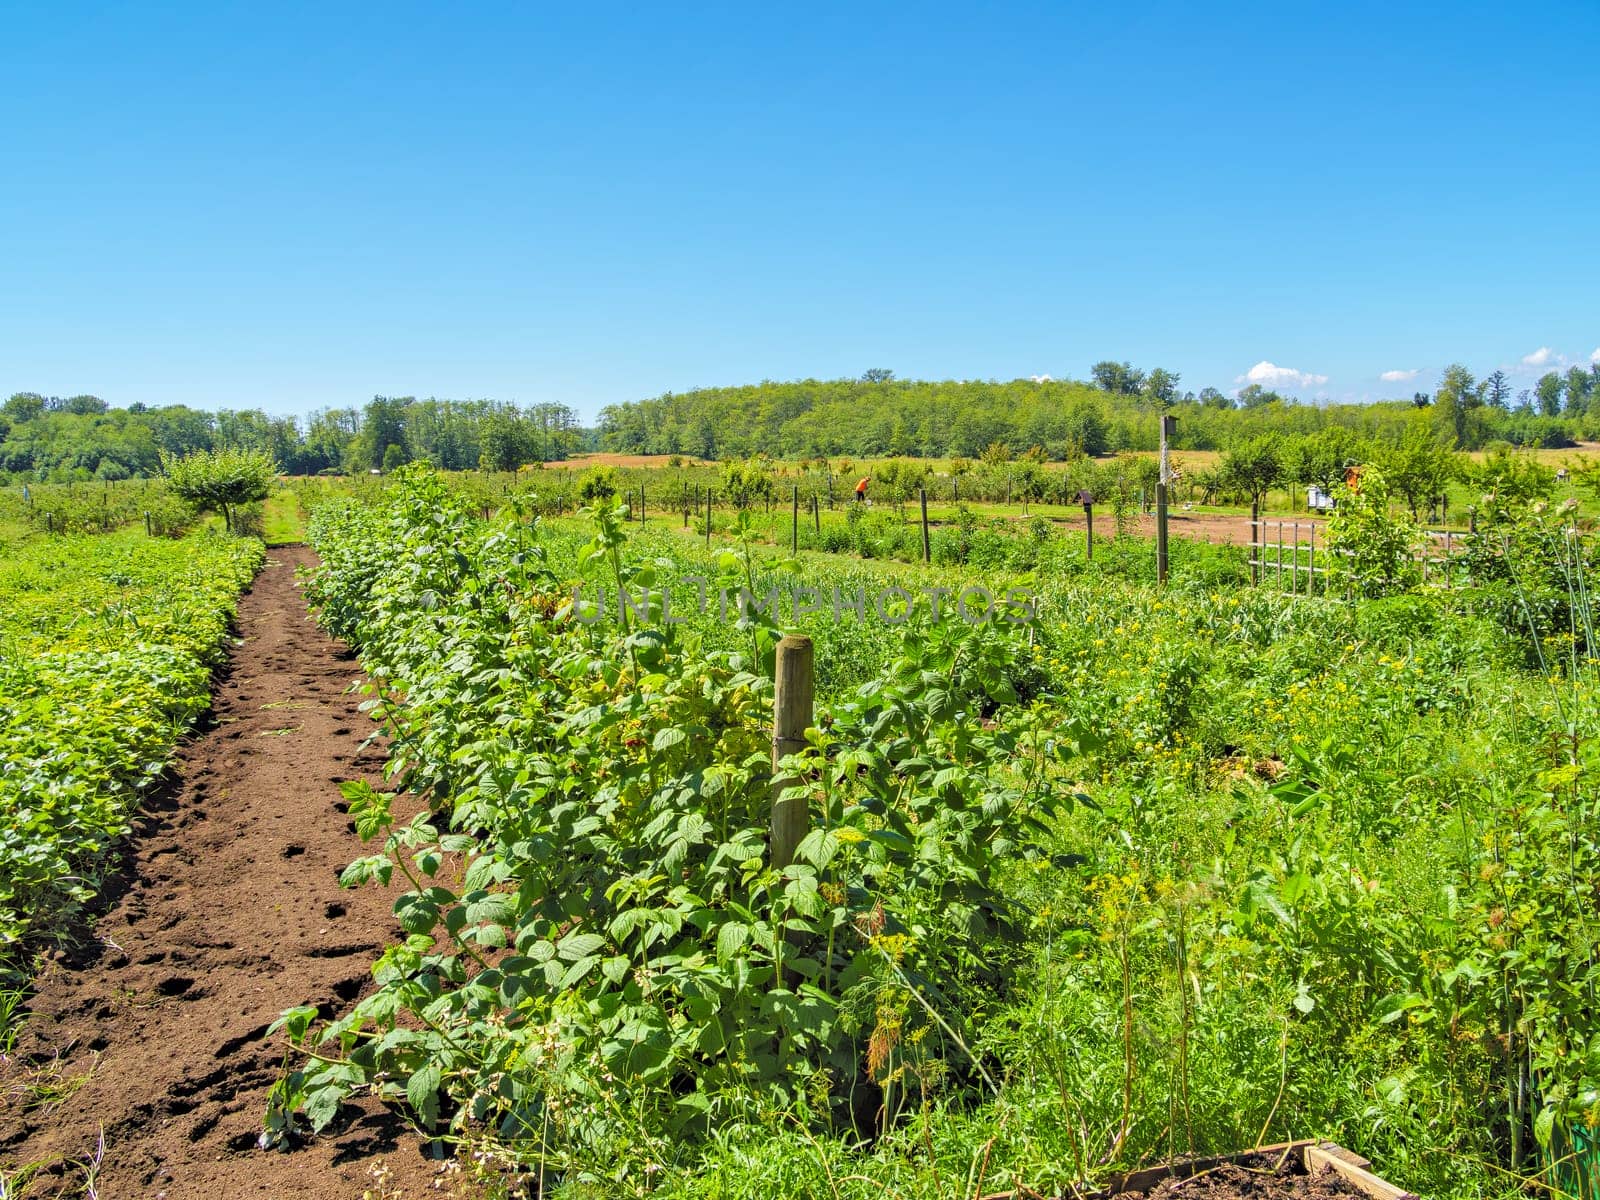 Farm worker on the field cultivating berry garden on a bright sunny day in British Columbia